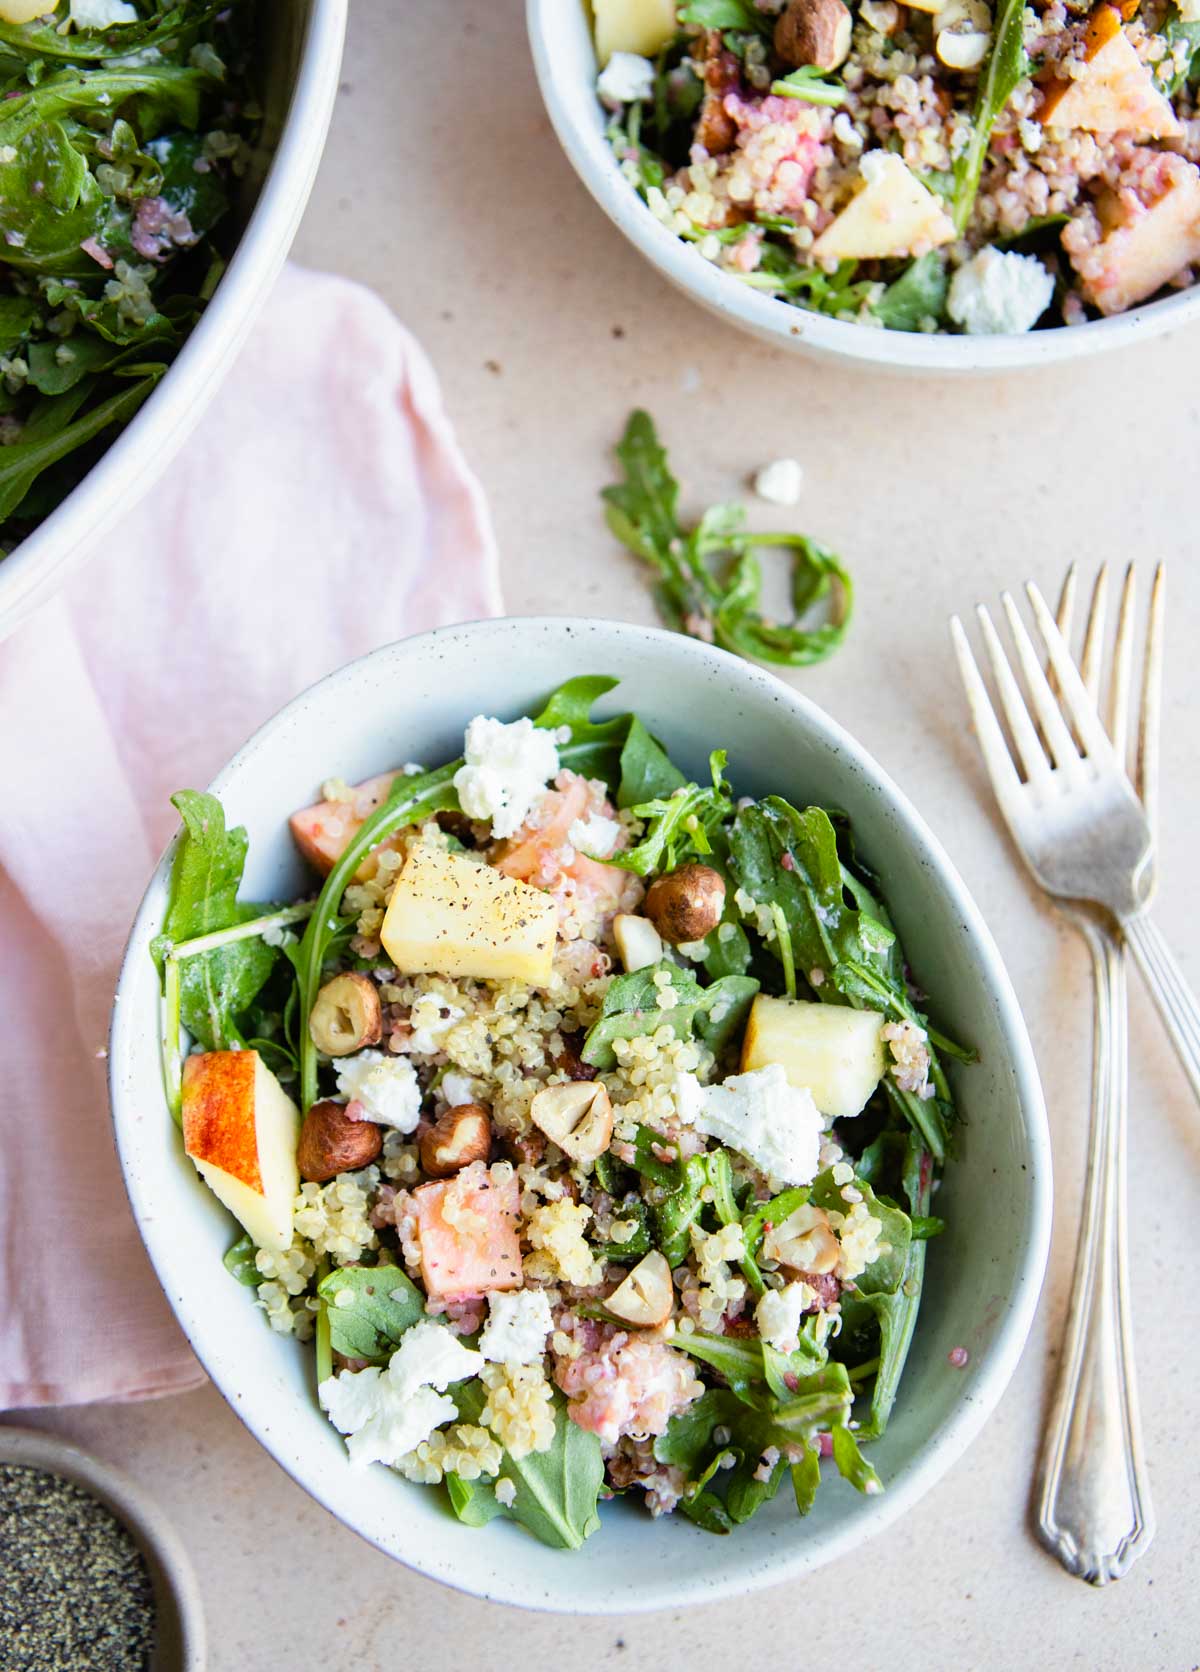 a small round bowl filled with an arugula and quinoa salad